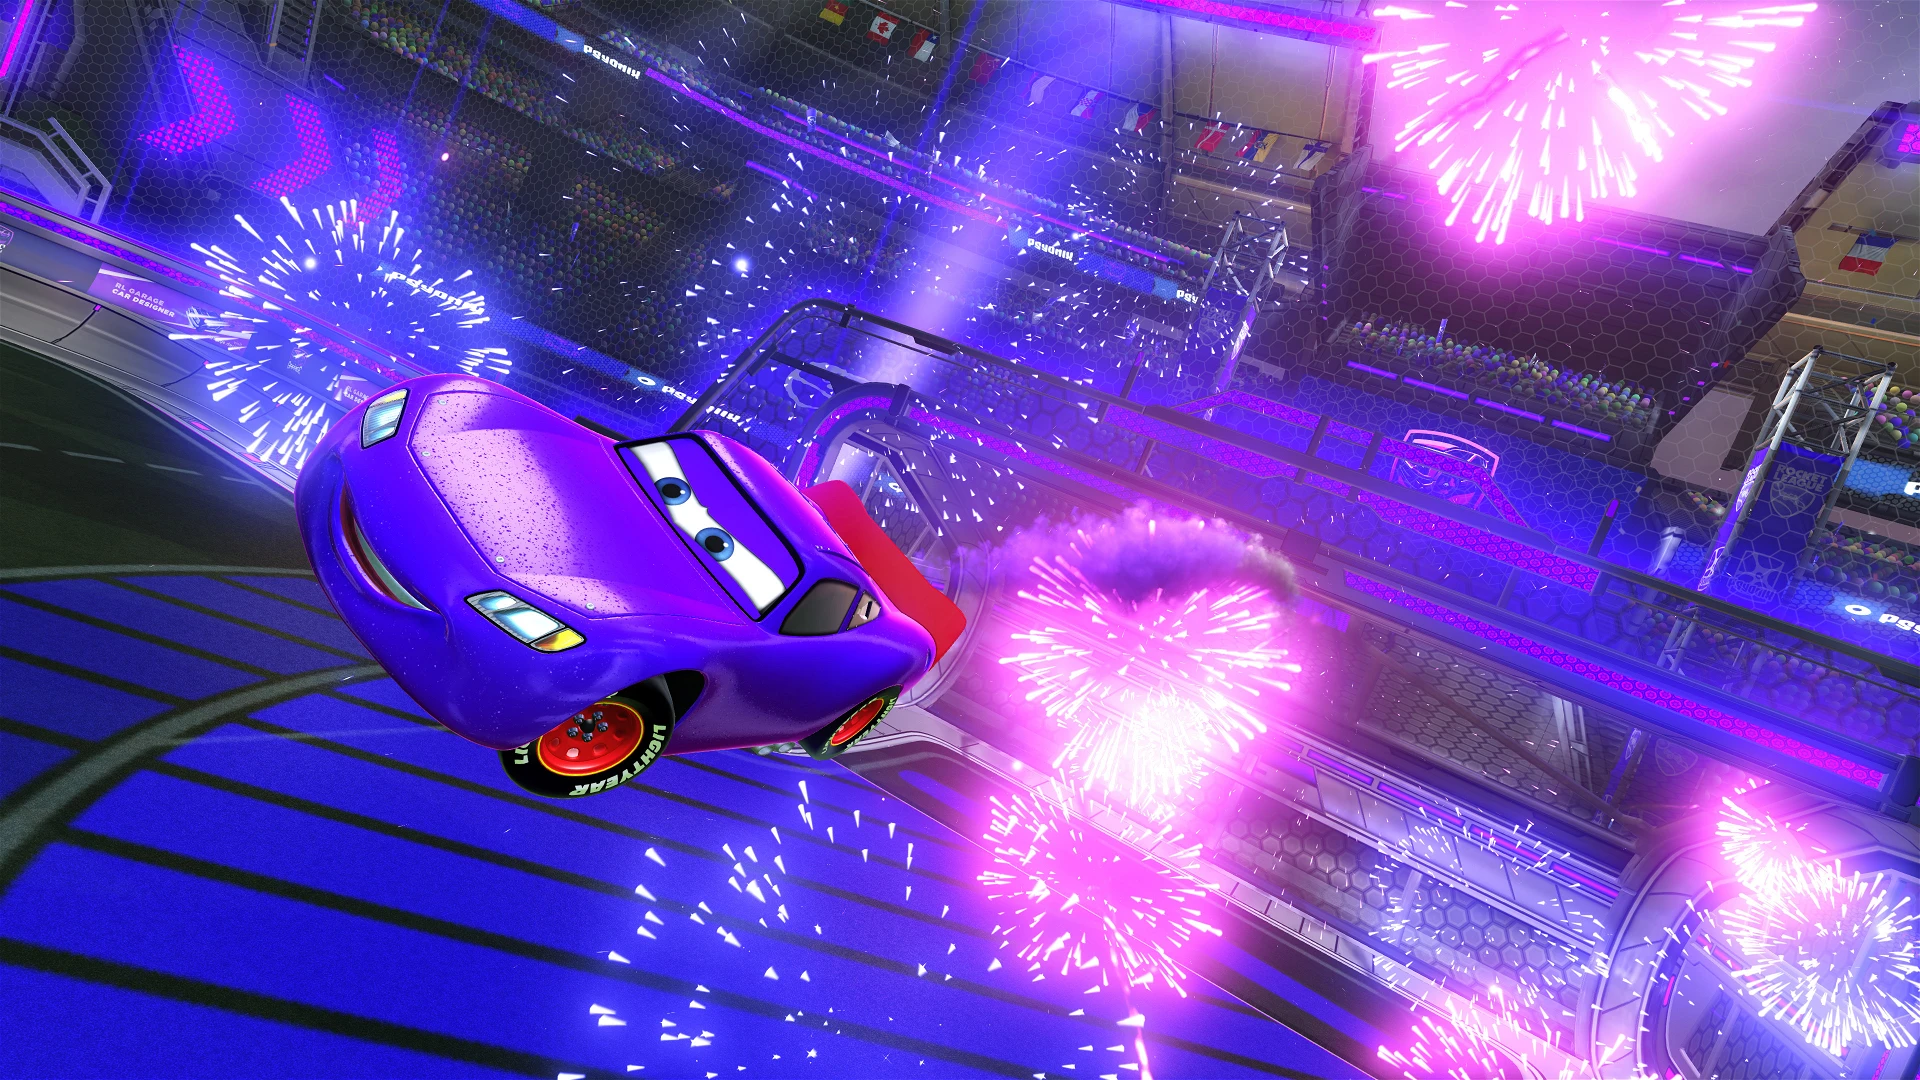 The Lightning McQueen Car Body Hits the Soccar Pitch in Rocket League